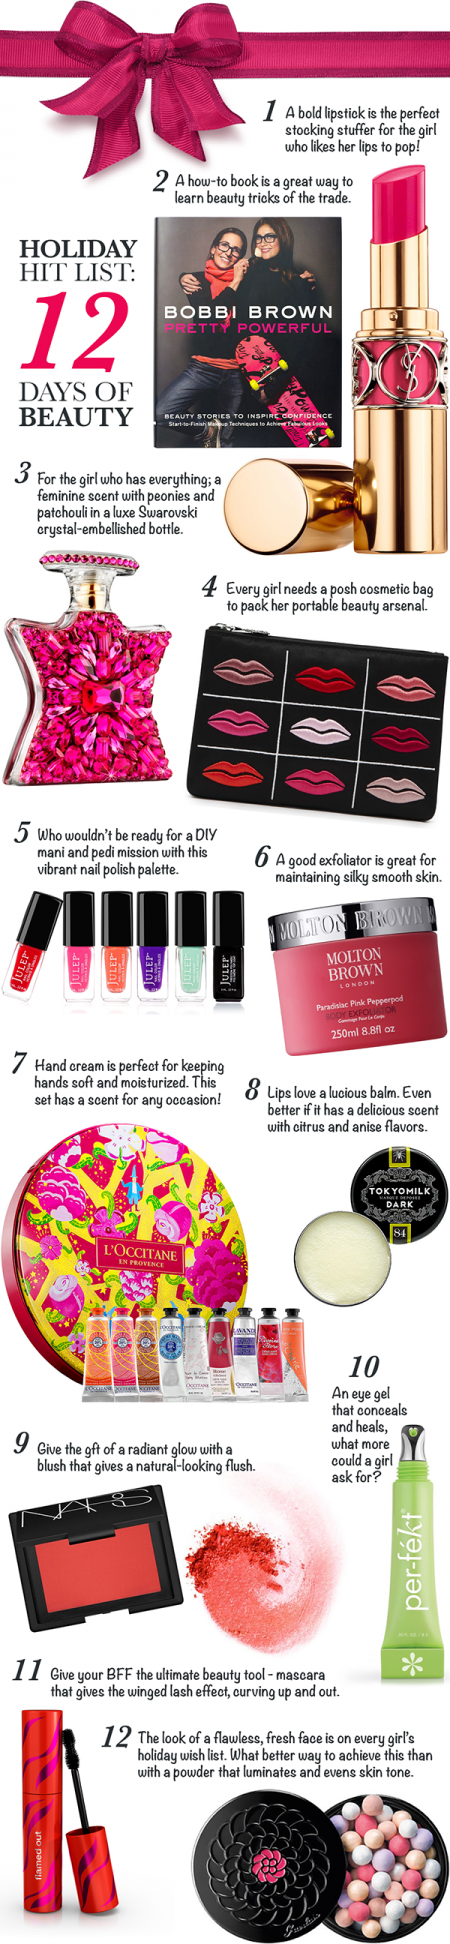 Holiday-Hit-List-12-Days-of-Beauty-Guide-13